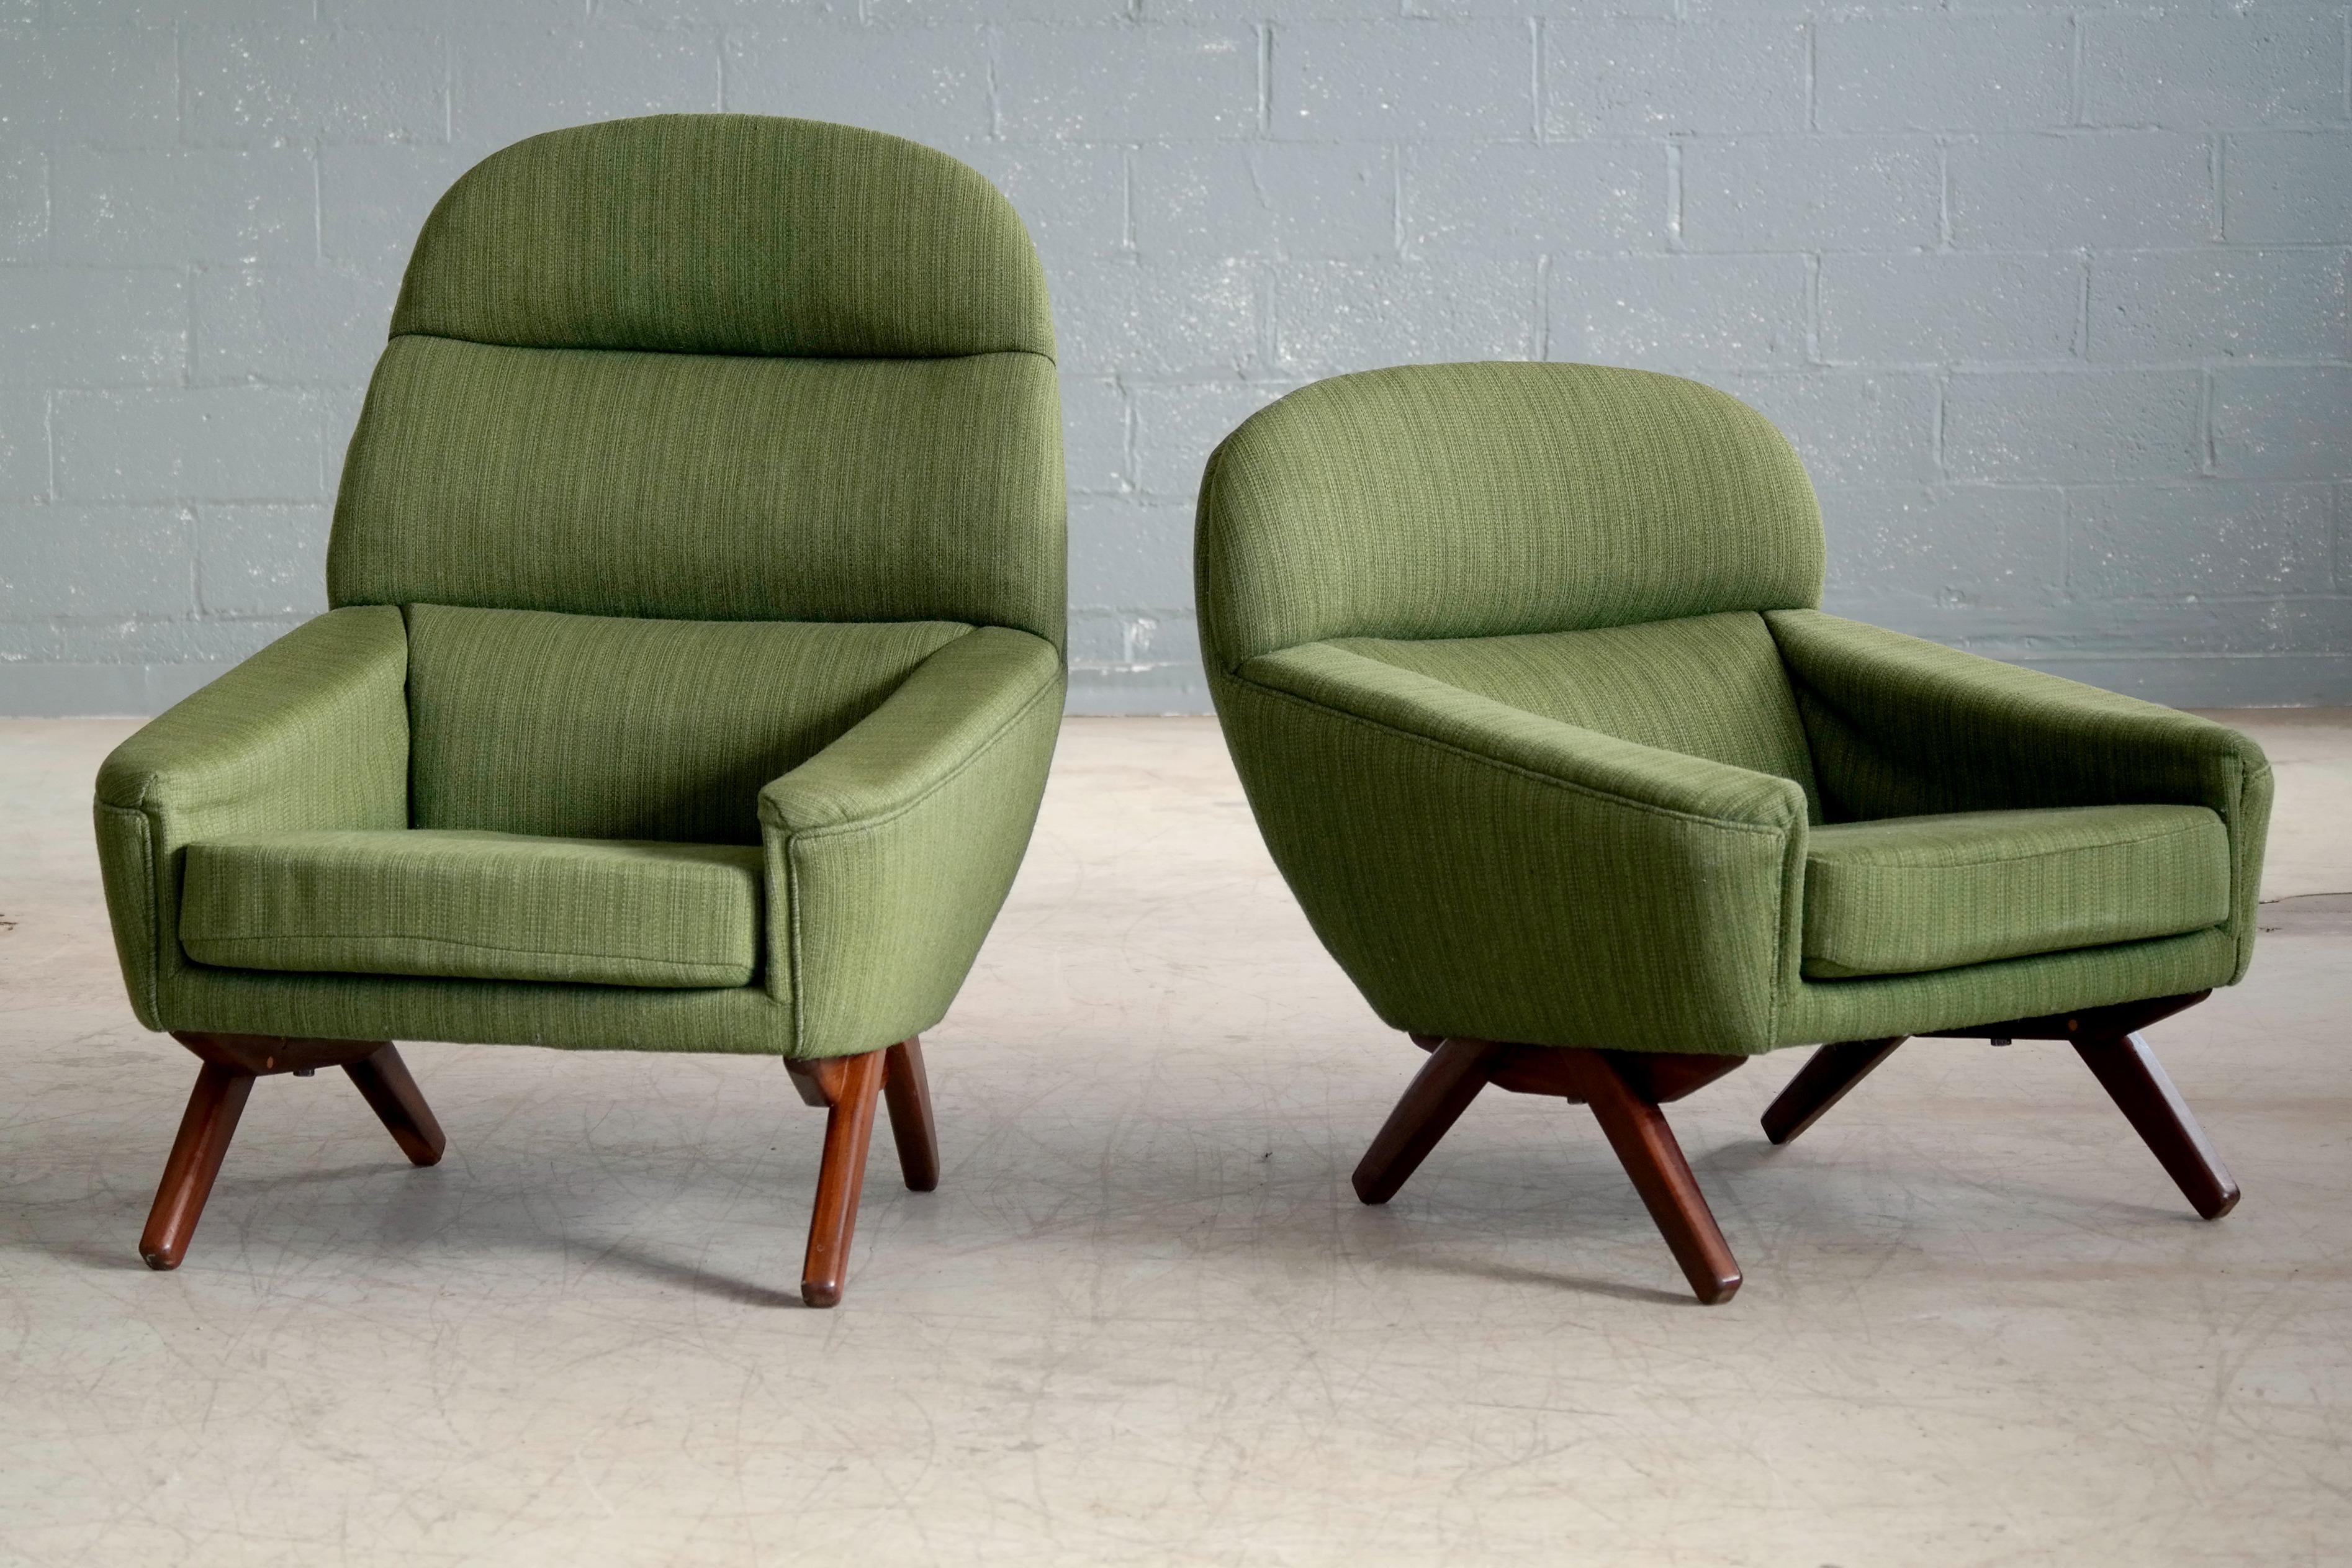 The spectacular design and rounded forms and scissor style base of these Leif Hansen designed chairs is very reminiscent one of Illum Wikkelso's most coveted designs the ML 91 chair. One difference is that Hansen's chairs have loose spring loaded